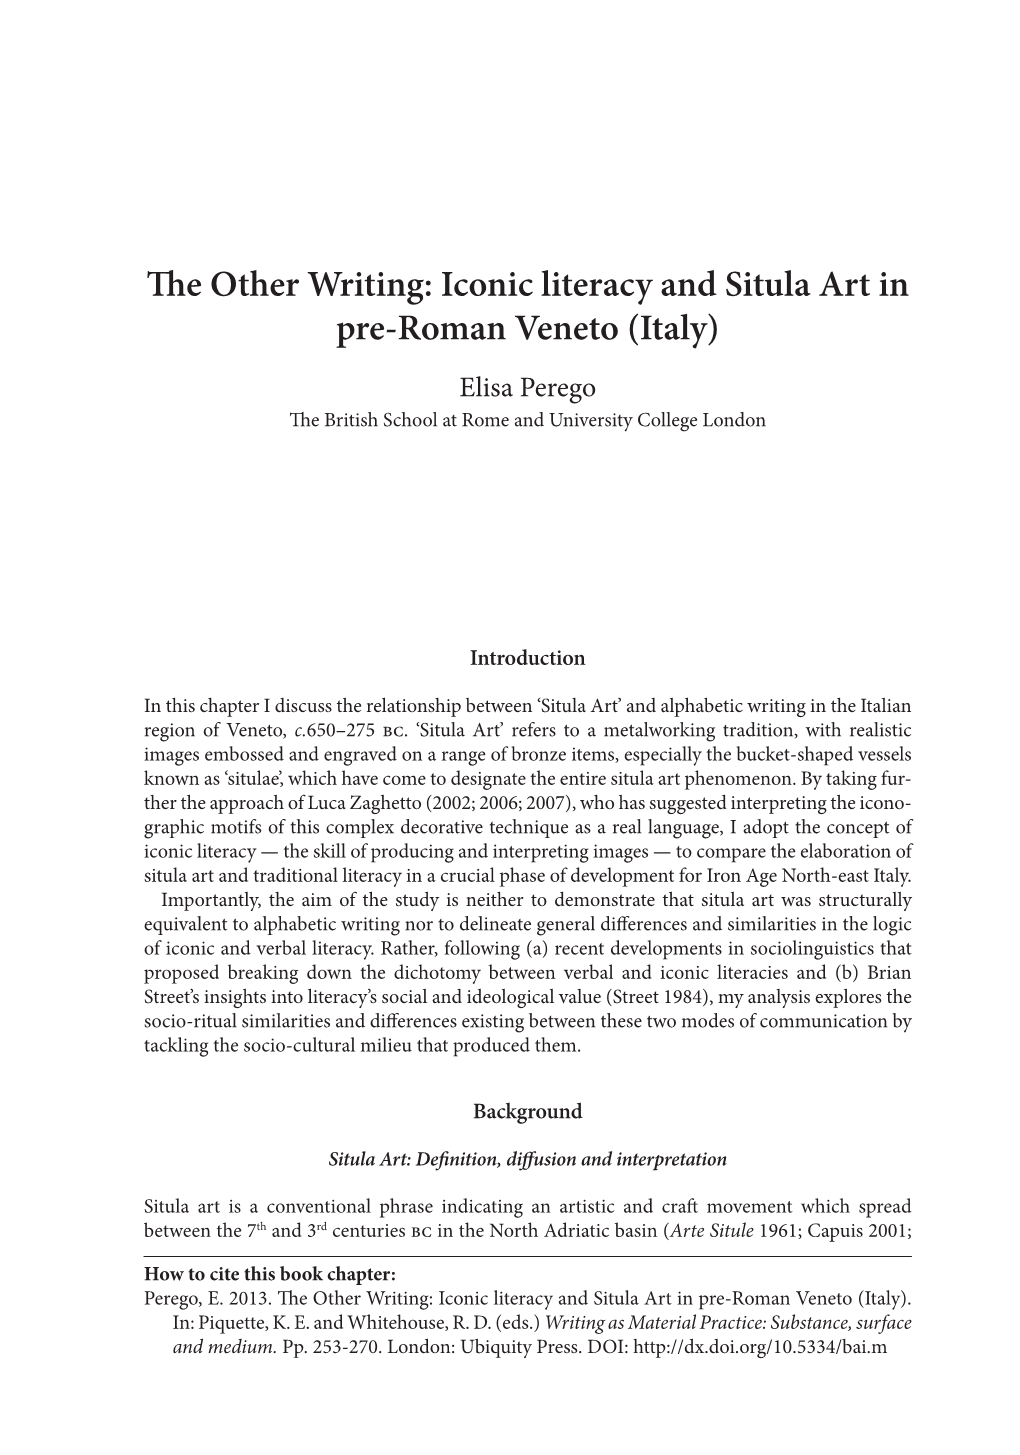 Iconic Literacy and Situla Art in Pre-Roman Veneto (Italy) Elisa Perego the British School at Rome and University College London